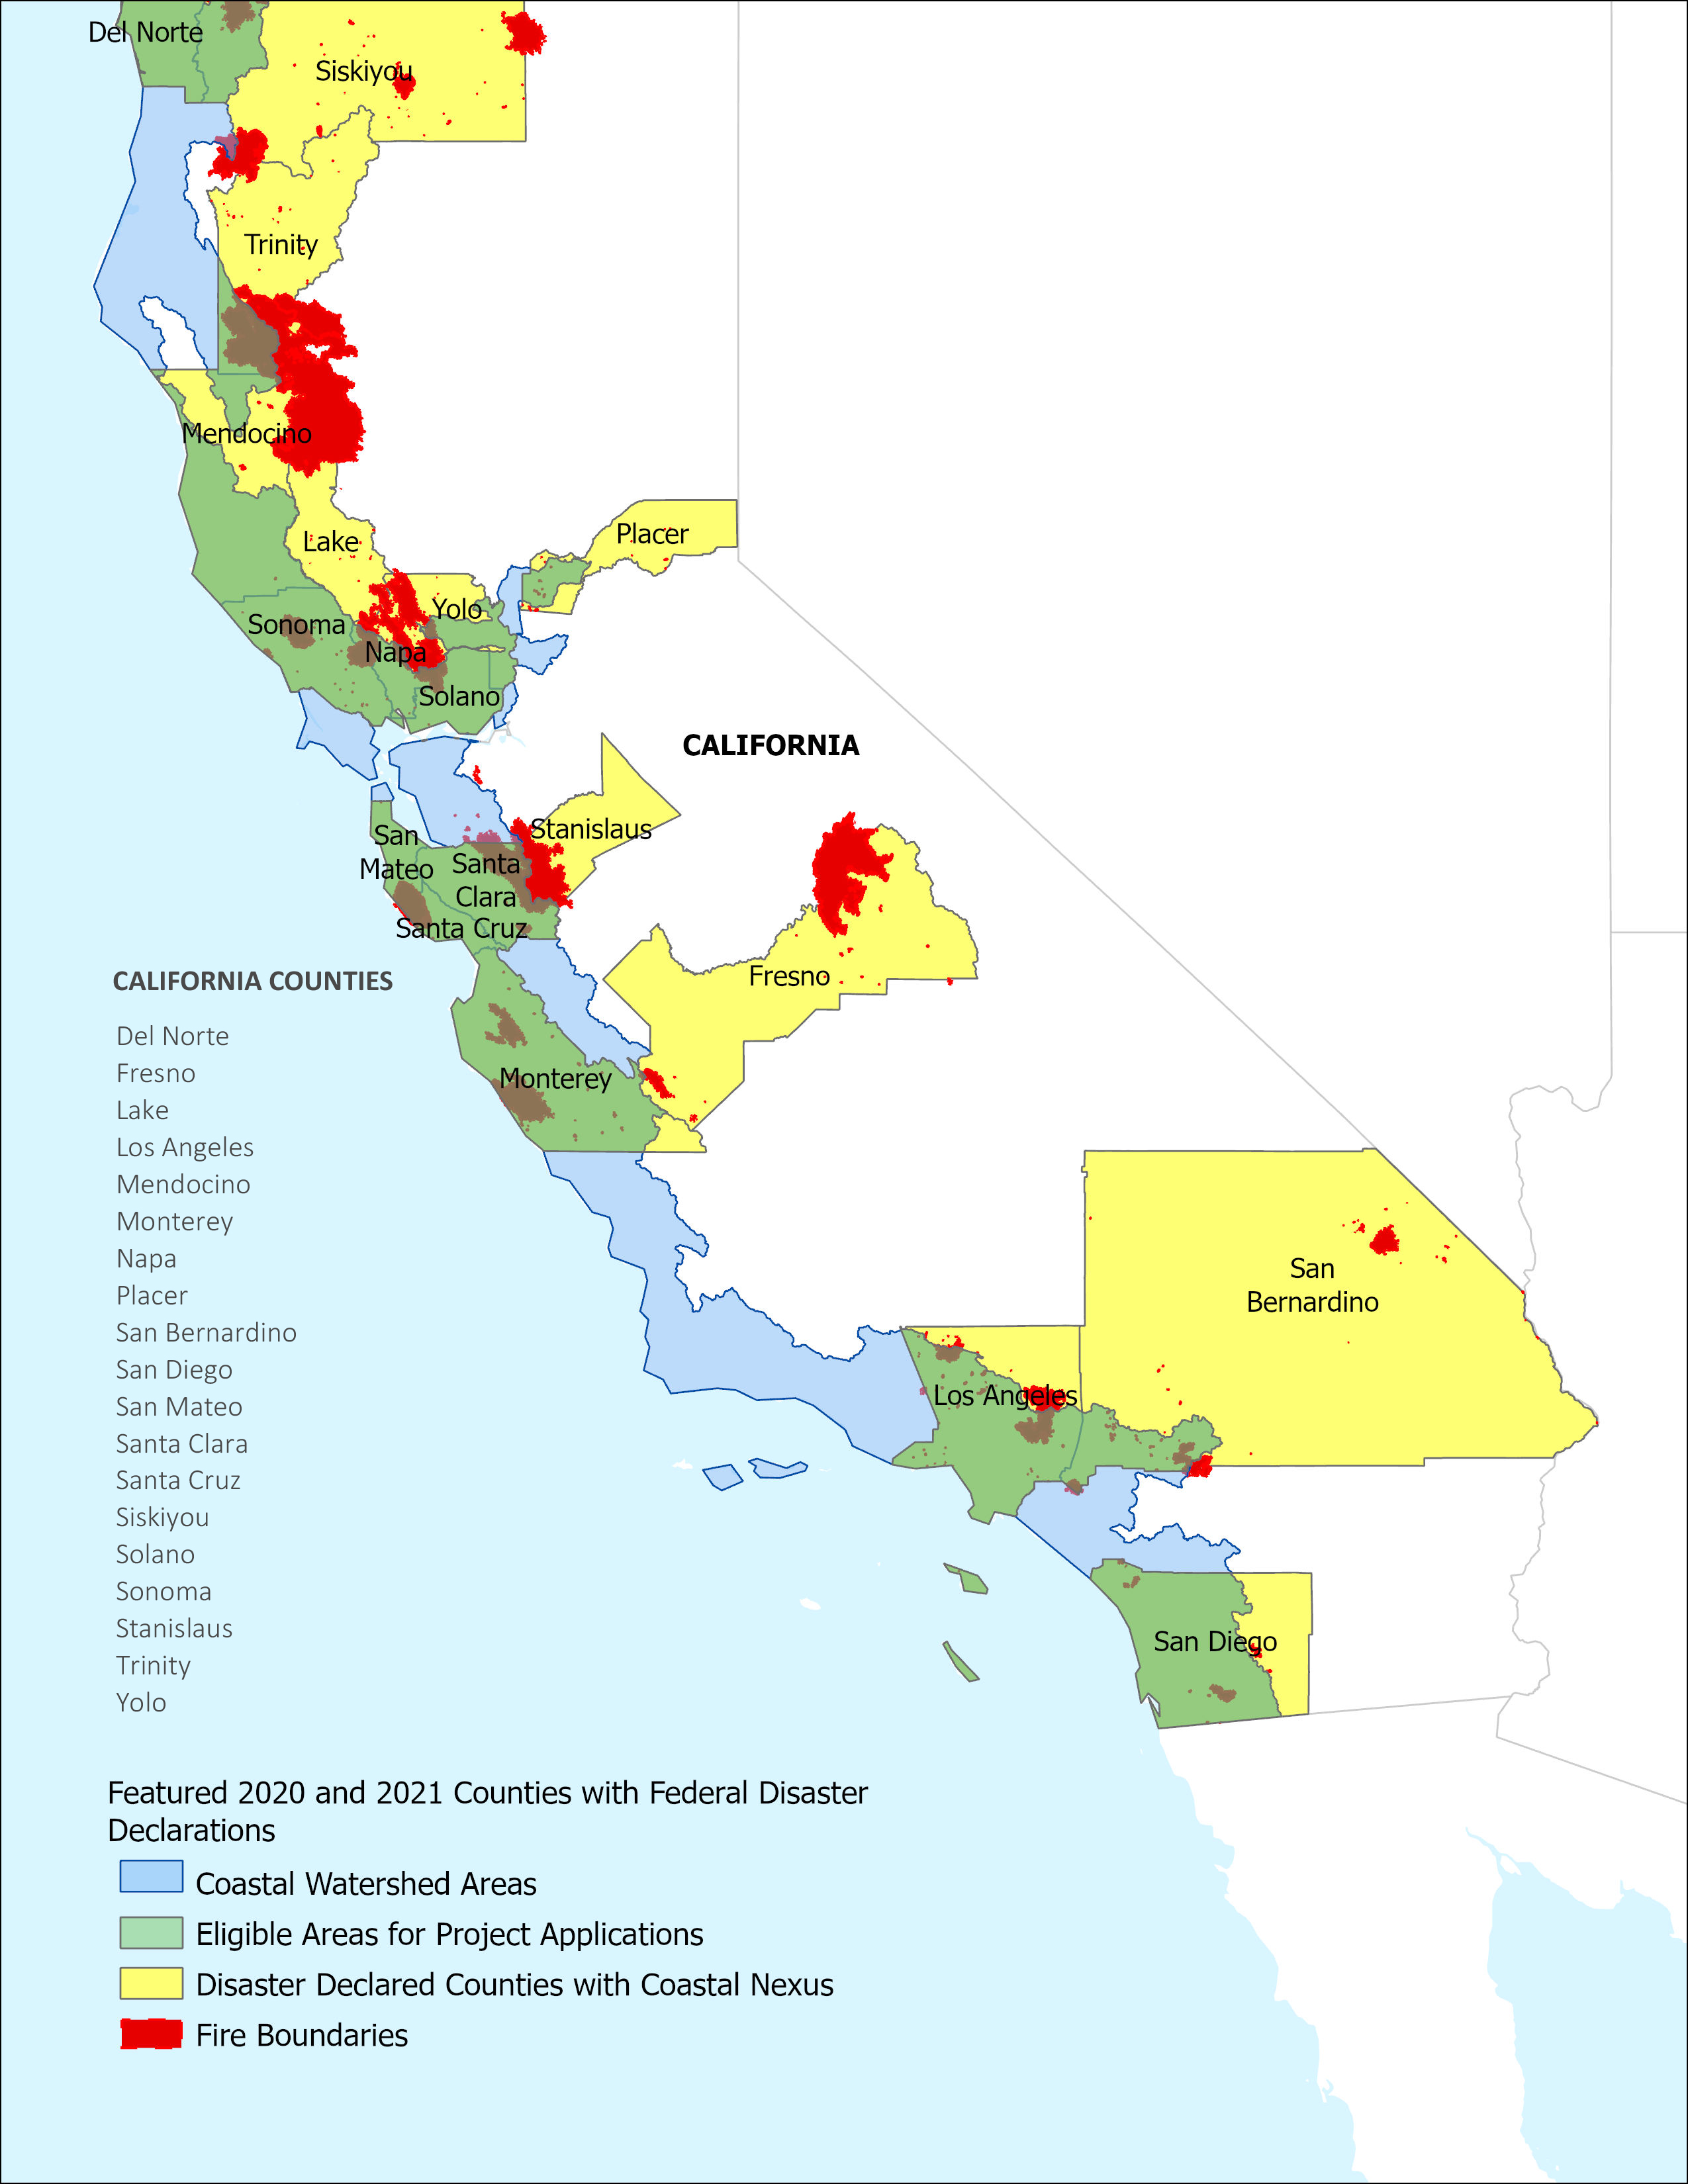 Map of California showing counties eligible for funding under this RFP